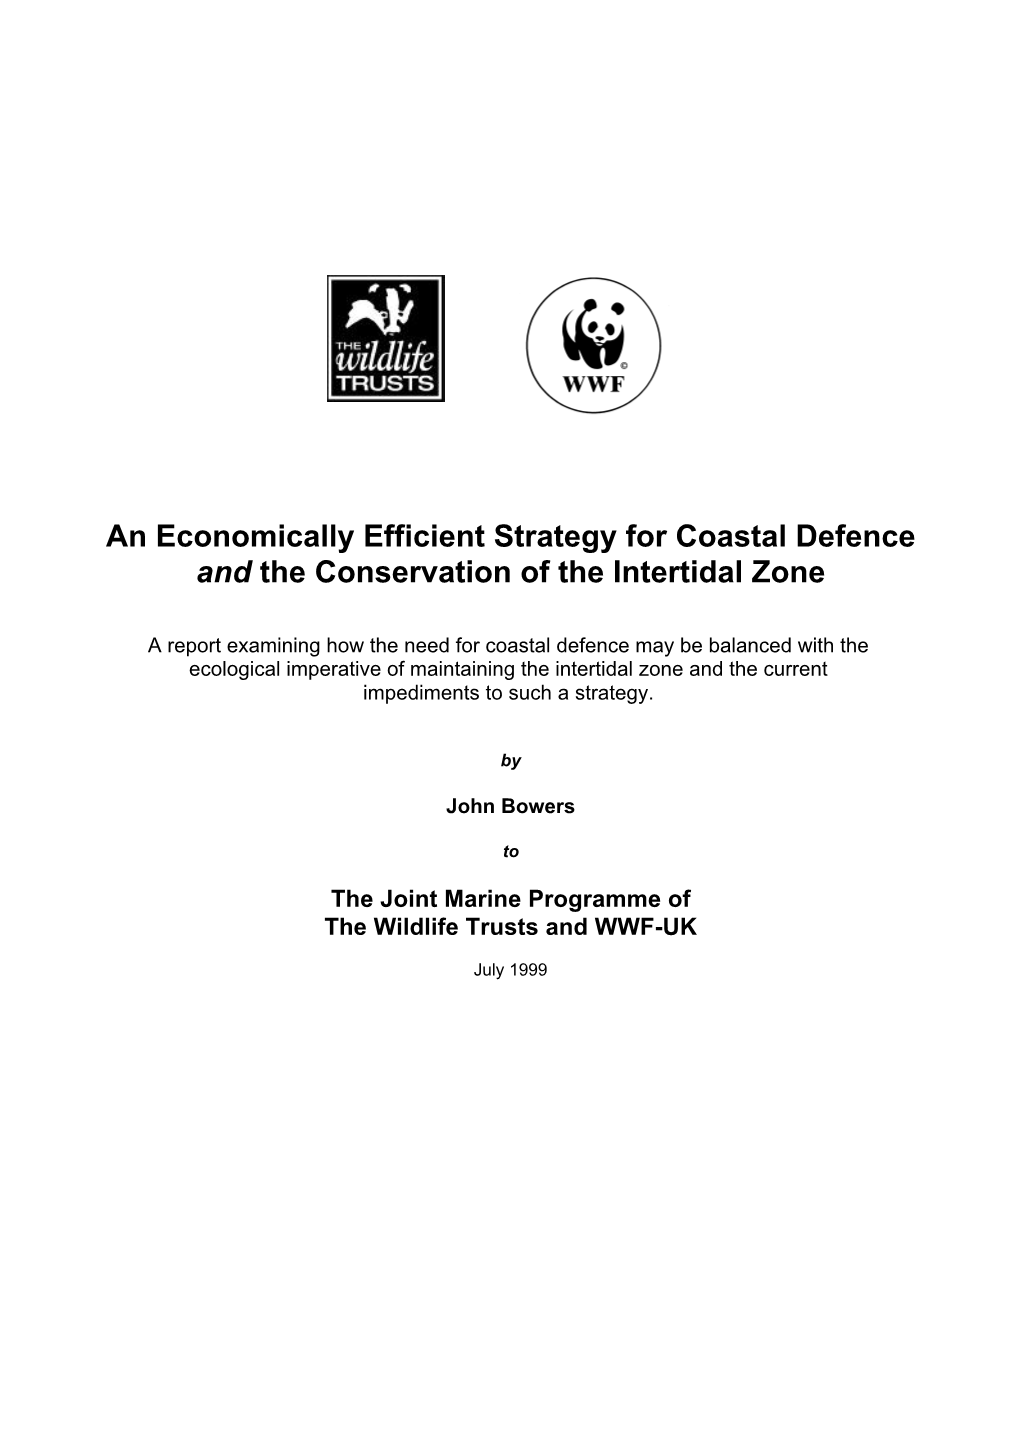 Economically Efficient Strategy for Coastal Defence and Conservation